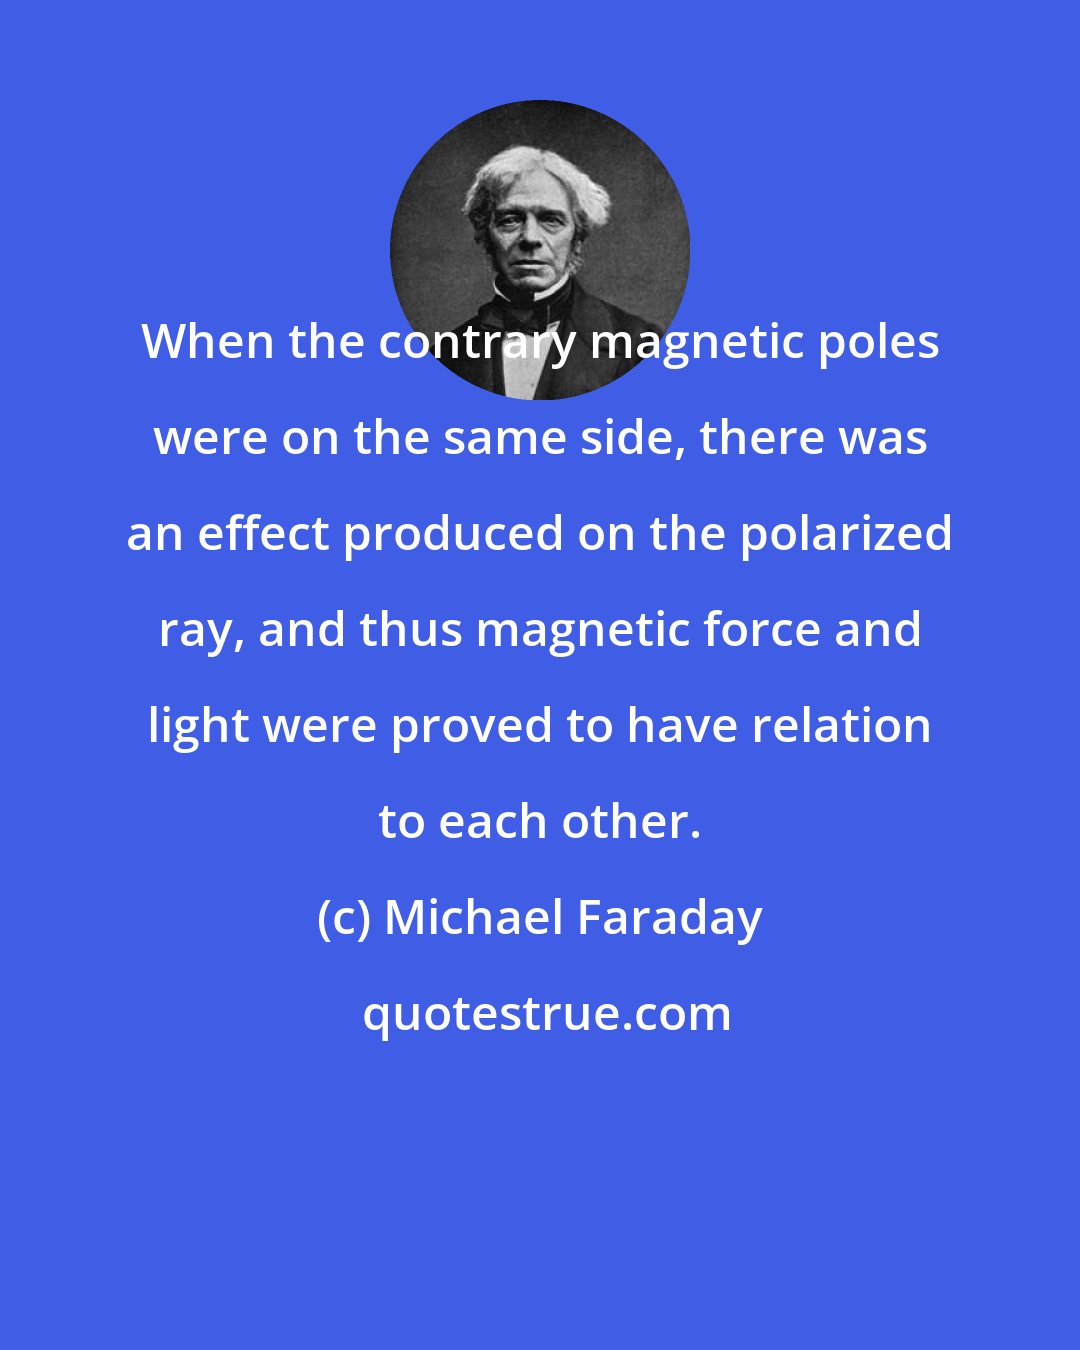 Michael Faraday: When the contrary magnetic poles were on the same side, there was an effect produced on the polarized ray, and thus magnetic force and light were proved to have relation to each other.